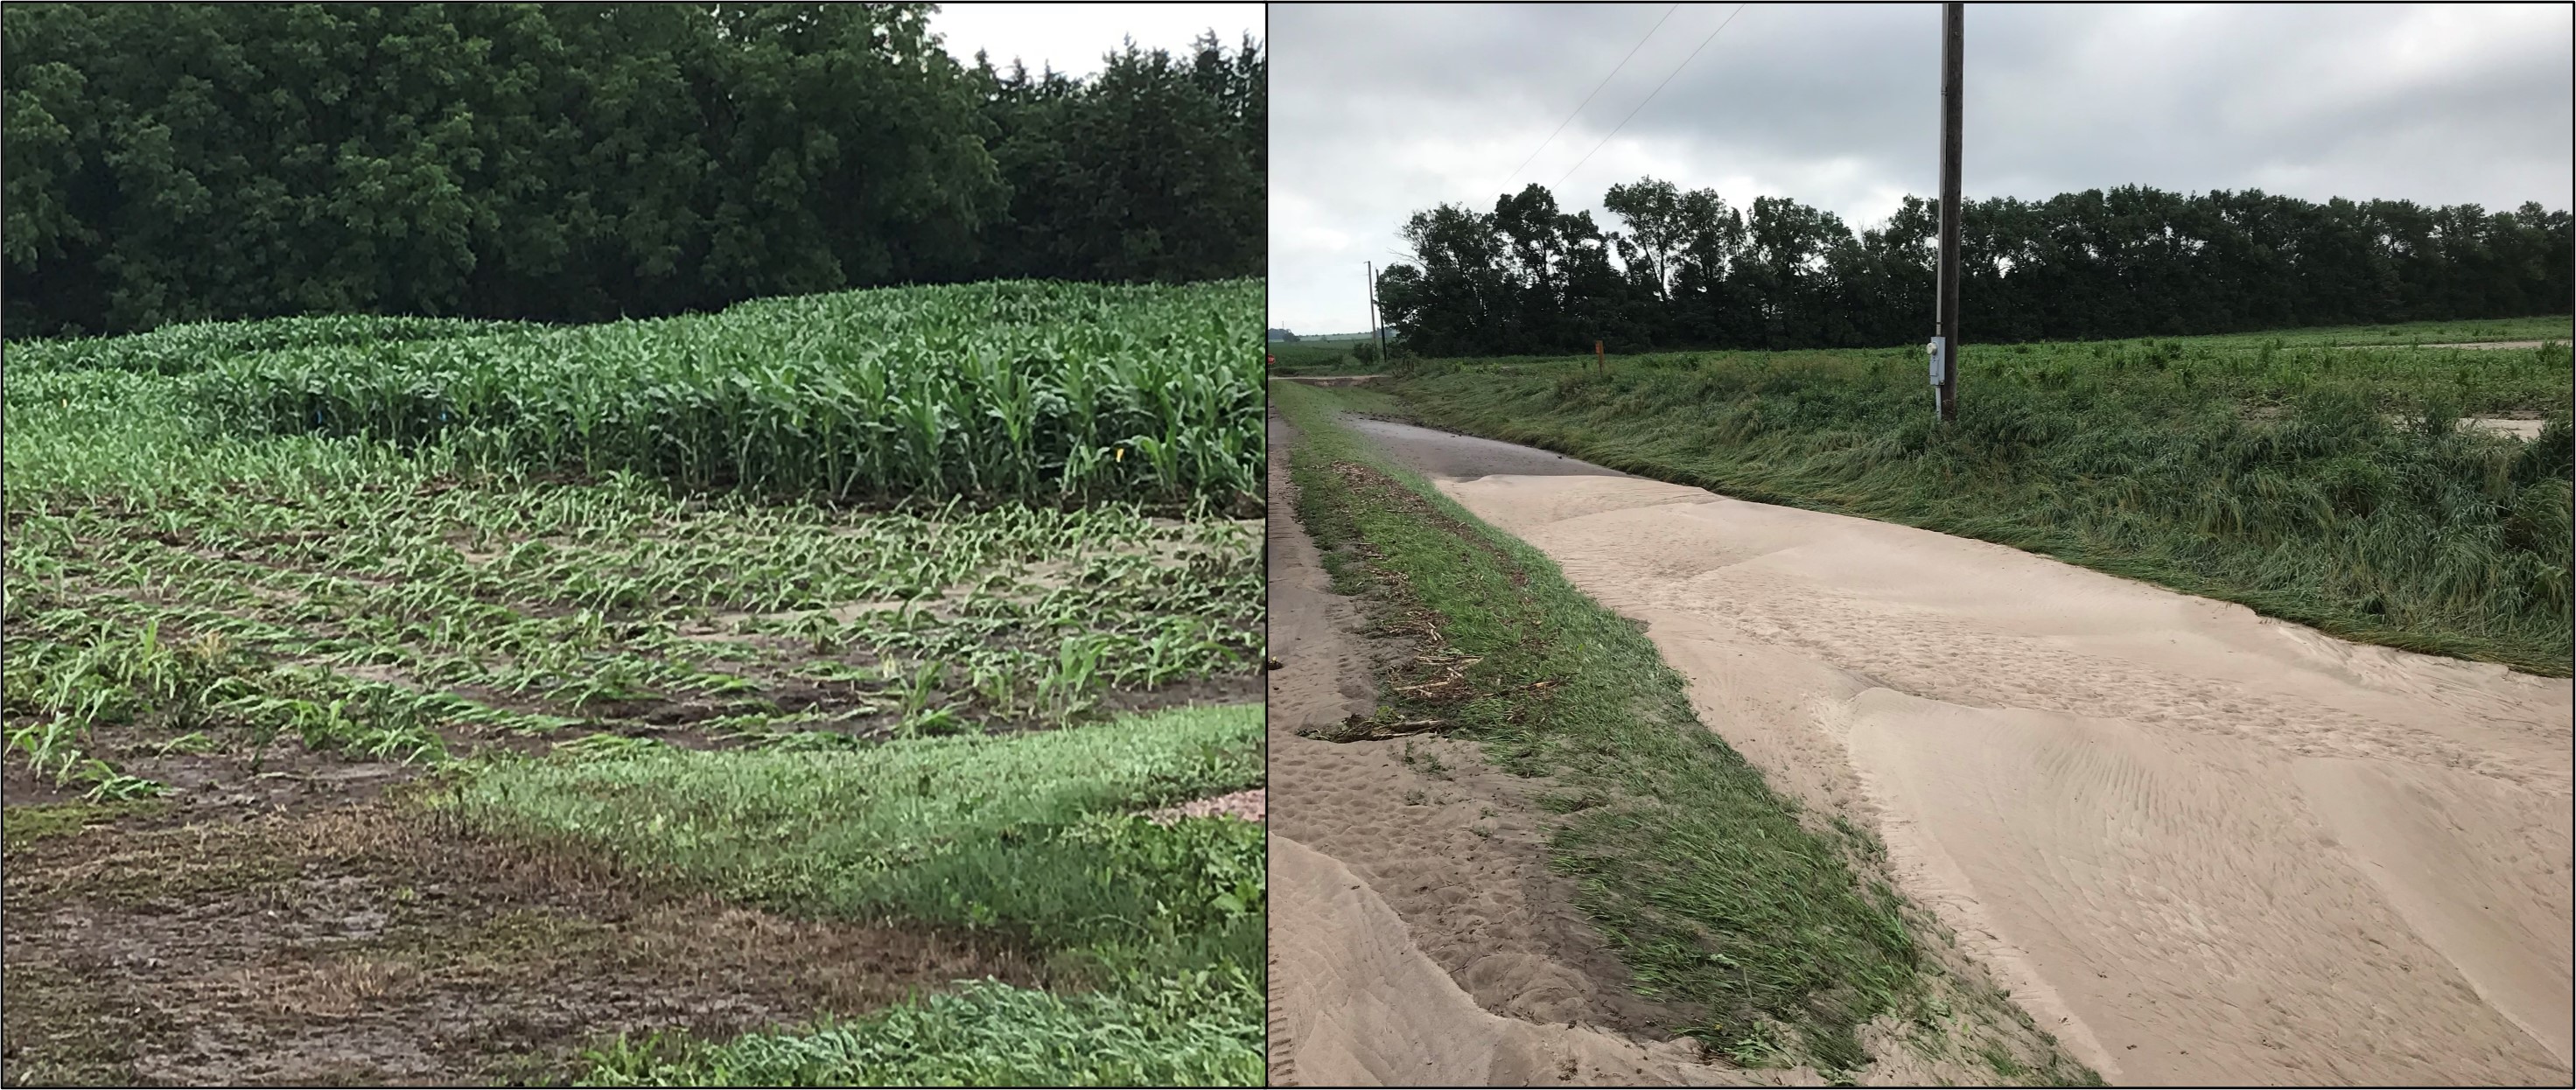 left photo of corn field flooded, right drainage ditch filled with eroded soil from adjacent field